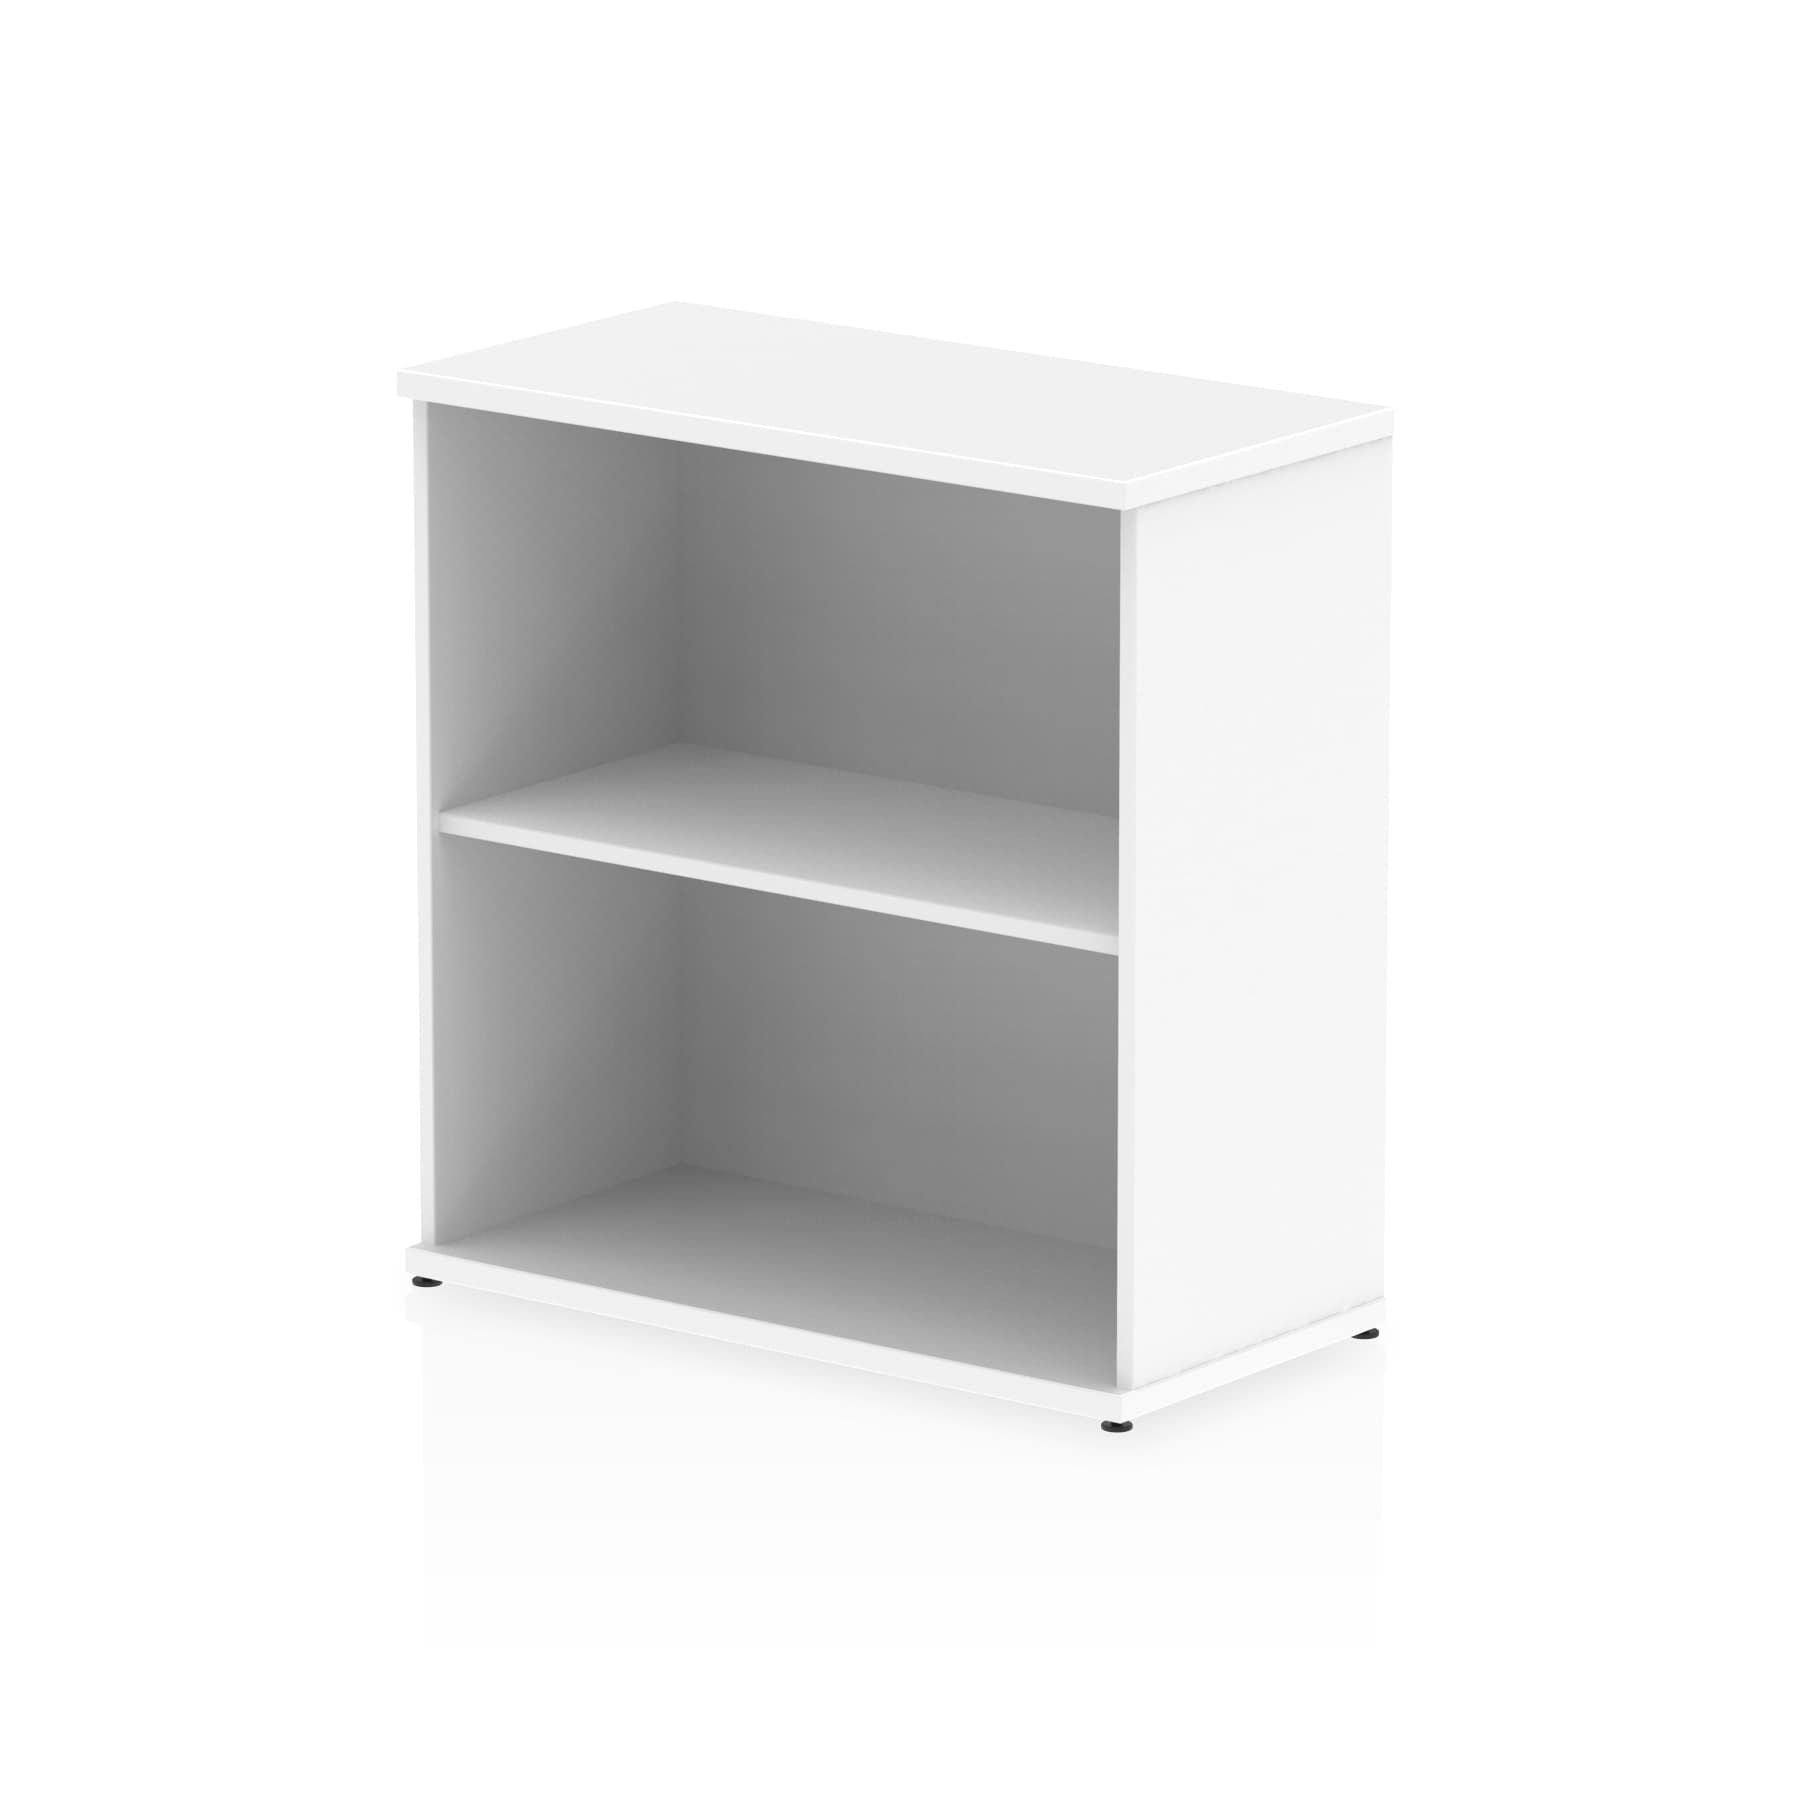 Impulse MFC Bookcase - Self-Assembly, Adjustable Shelves, 4 Sizes (800x400x800/1200/1600/2000mm) - 5-Year Guarantee